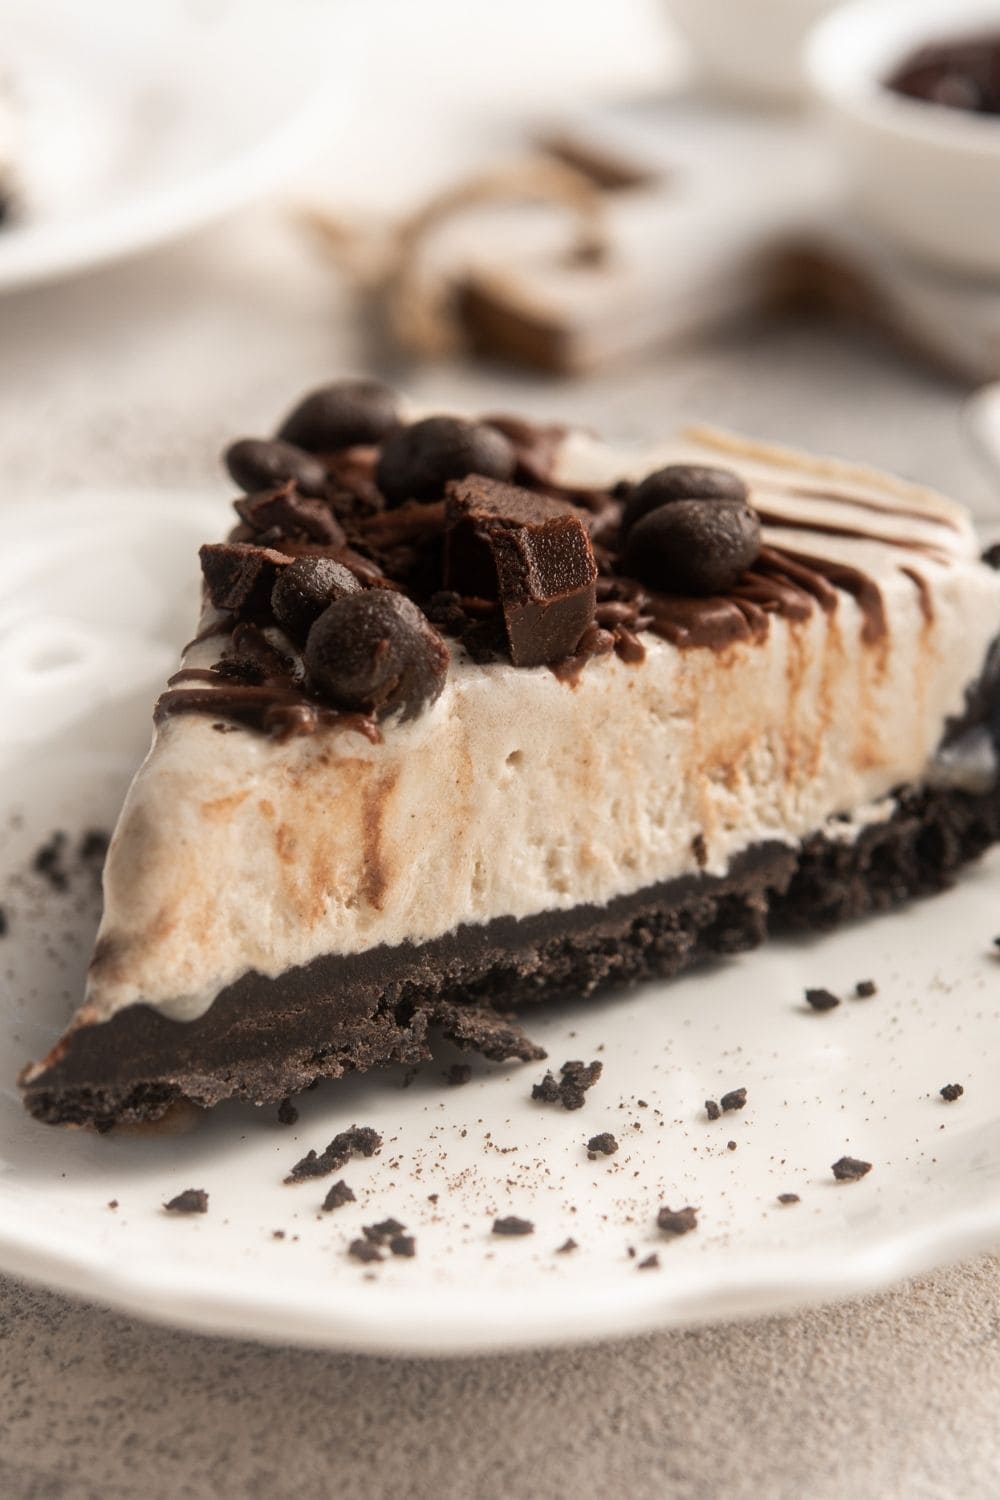 30 Best Ice Cream Desserts for a Sweet Summer featuring Cookies and Cream Ice Cream Mud Pie